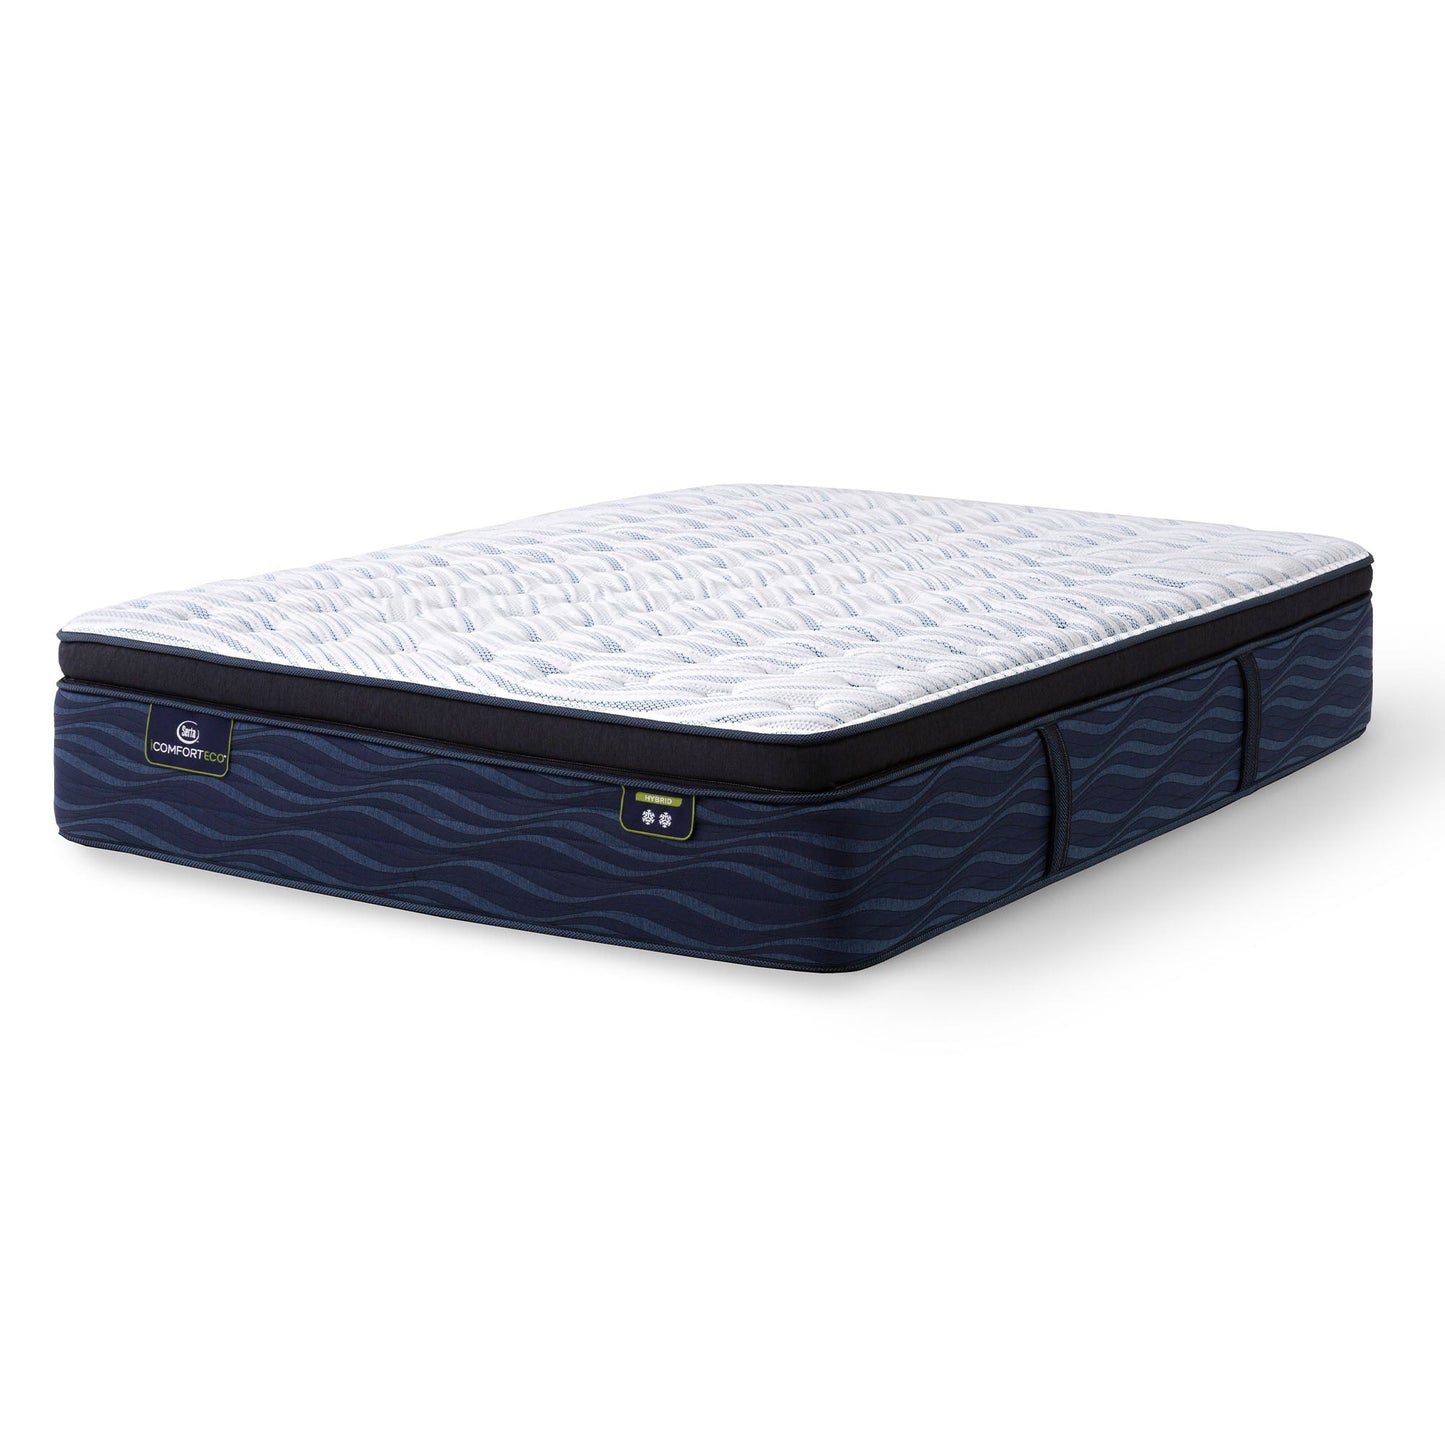 Serta iComfortECO Quilted Hybrid Firm Pillow Top Mattress